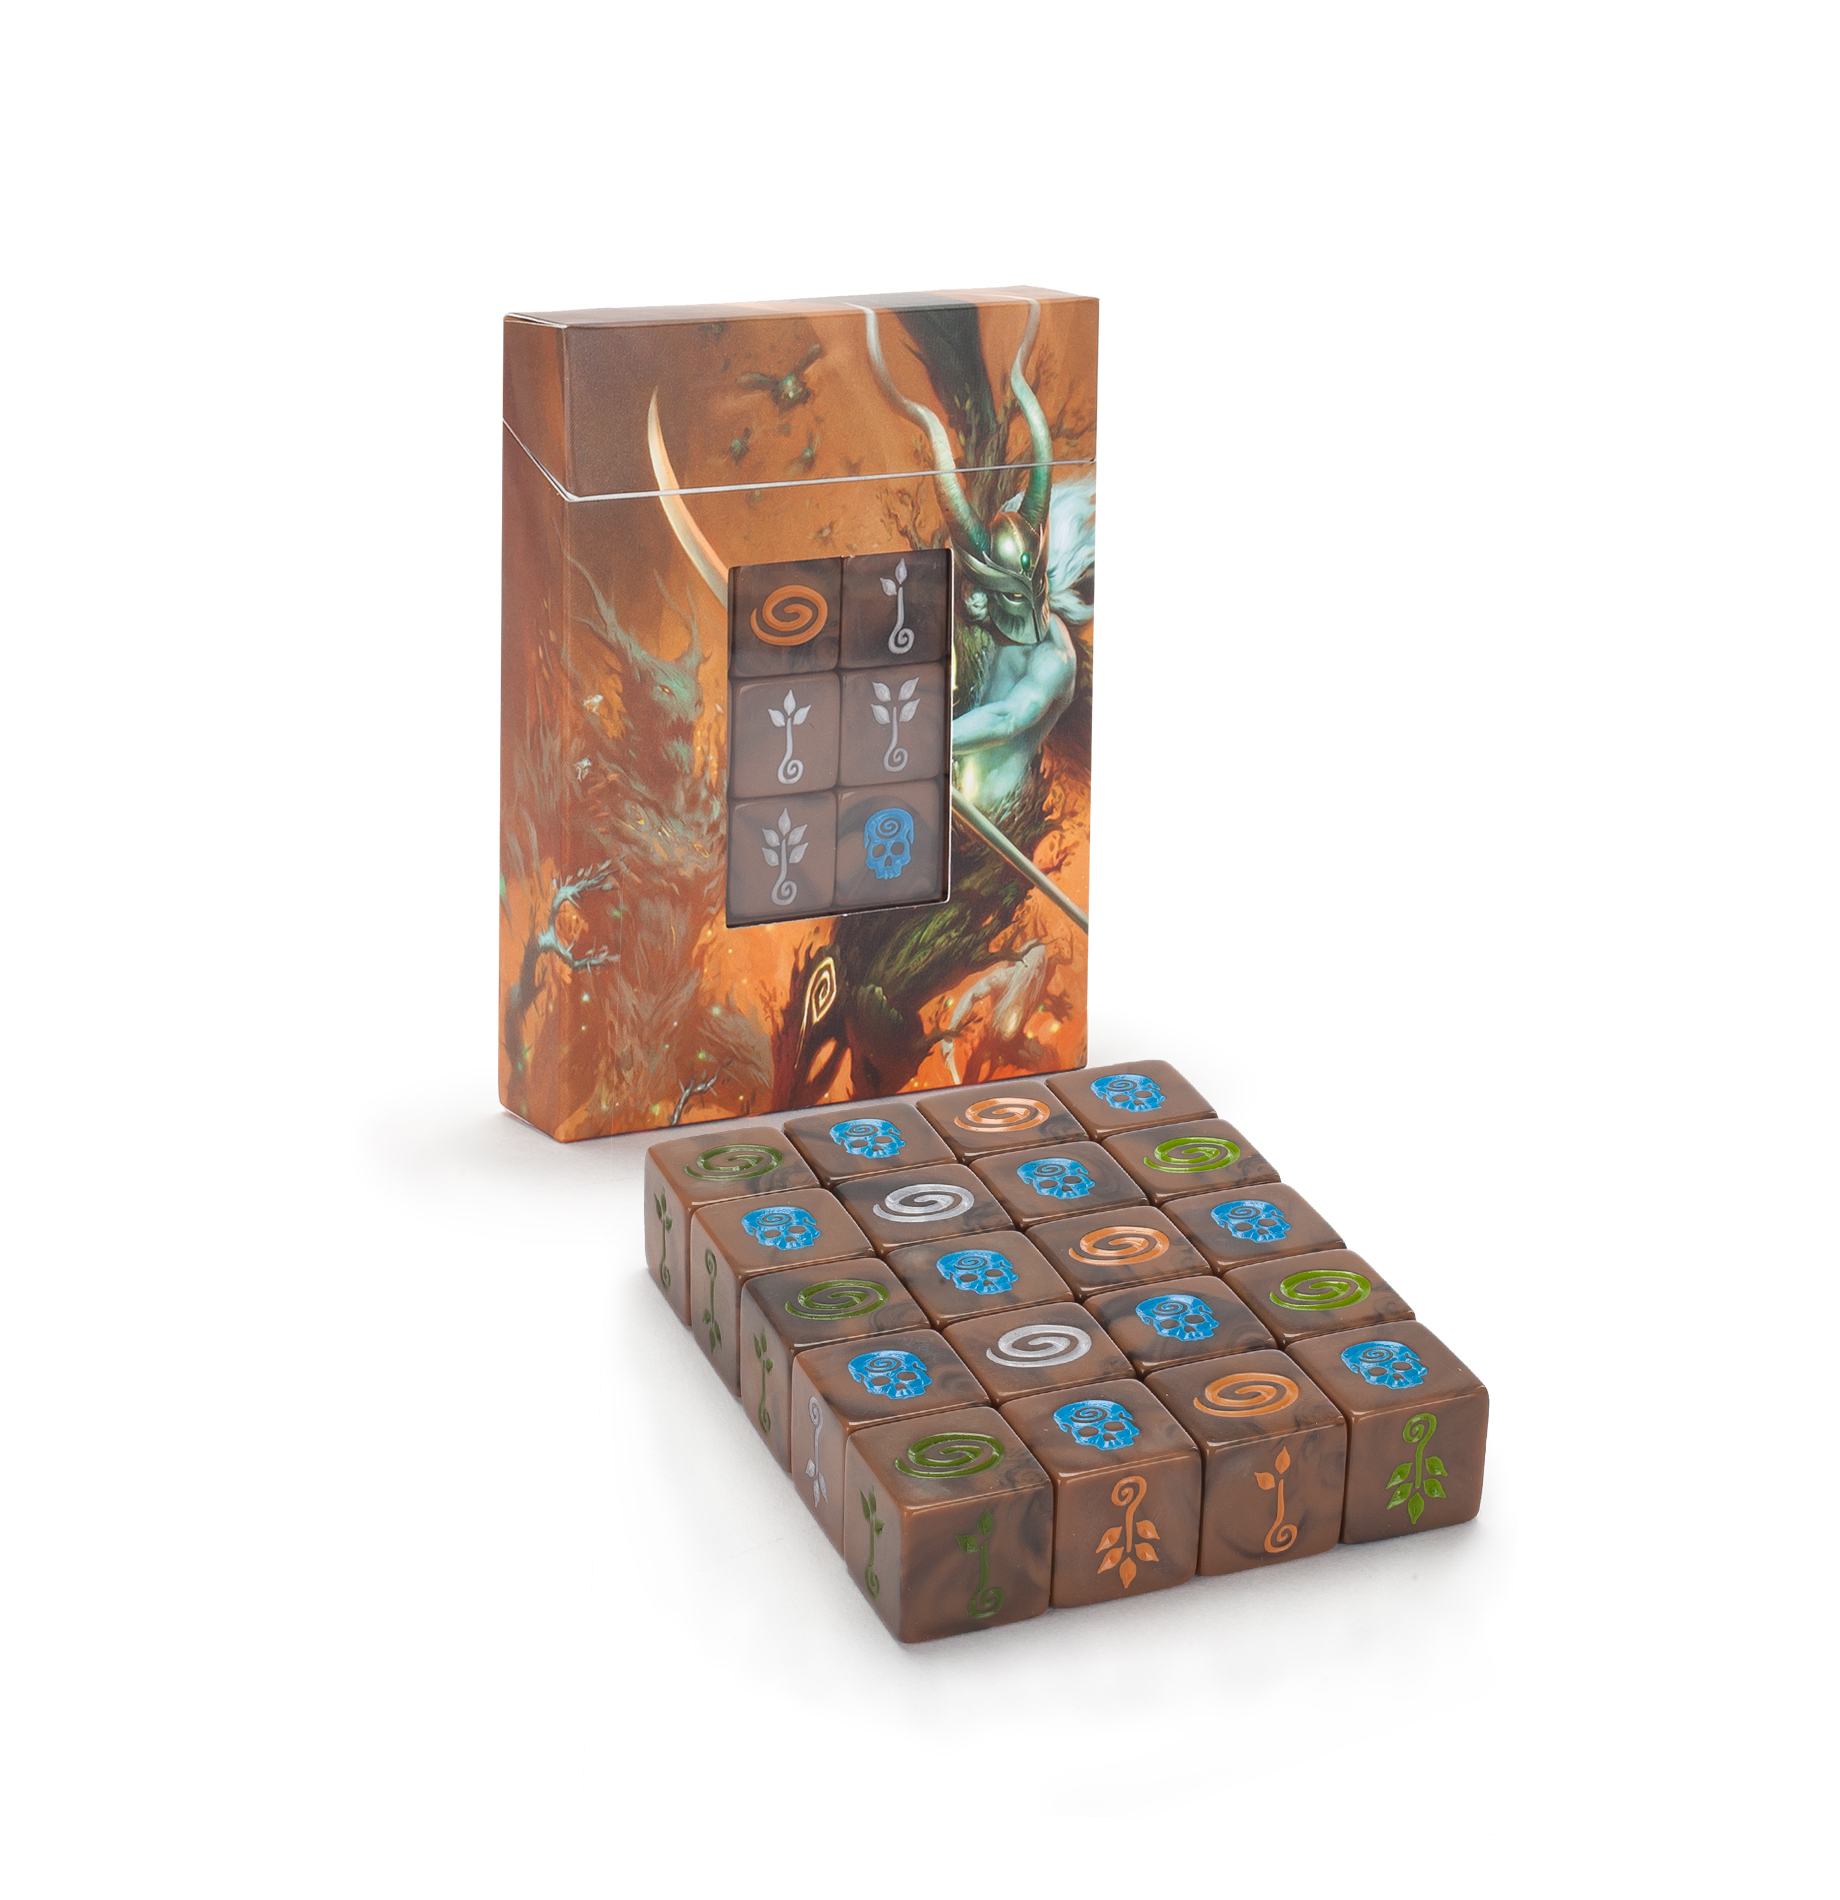 Warhammer Age of Sigmar: Sylvaneth Dice Set | All About Games